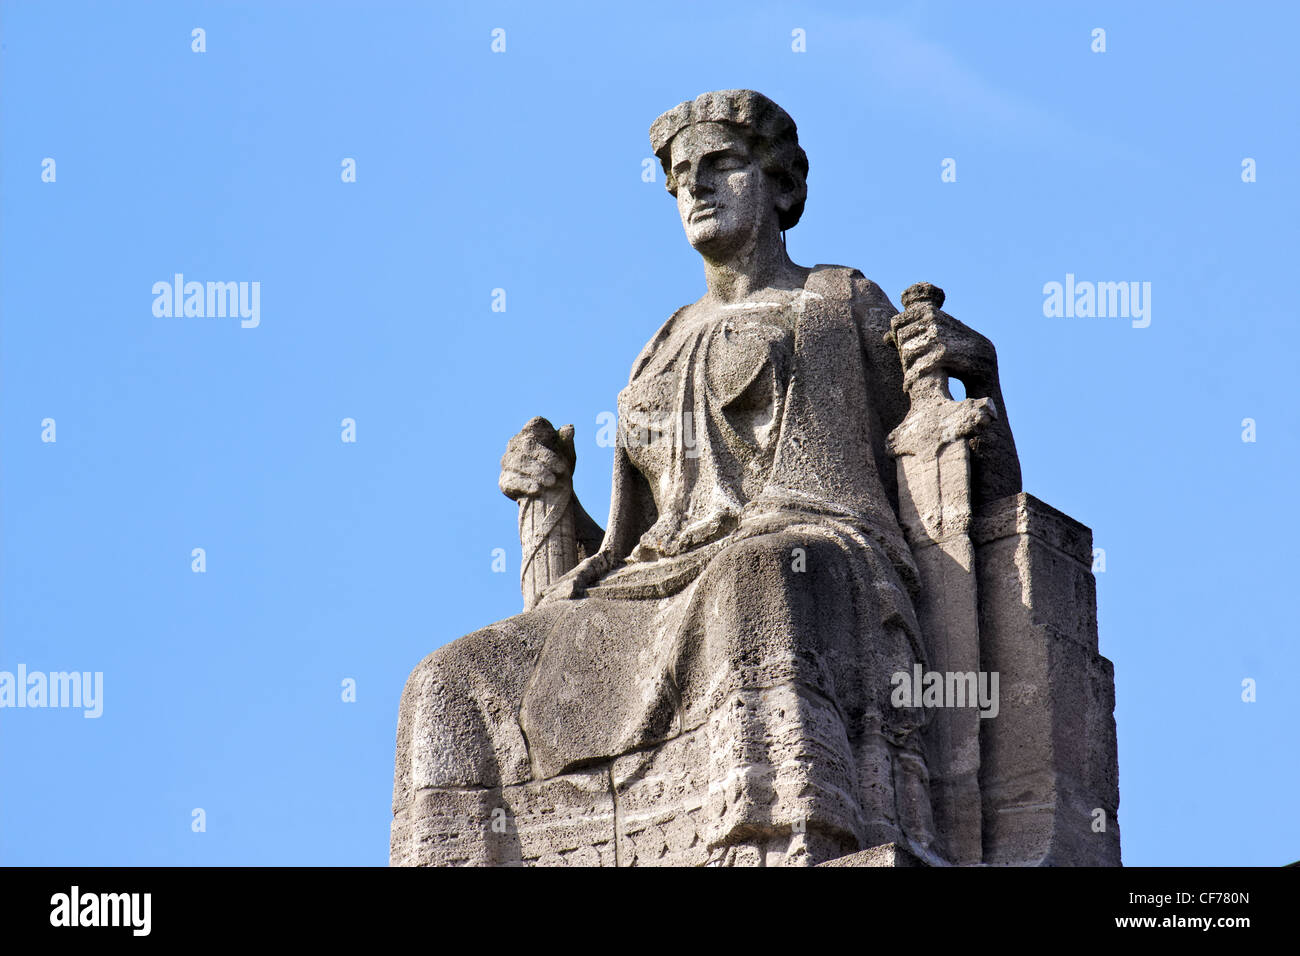 Justitia, Lady Justice, sitting on her throne in Hamburg, Germany. Stock Photo